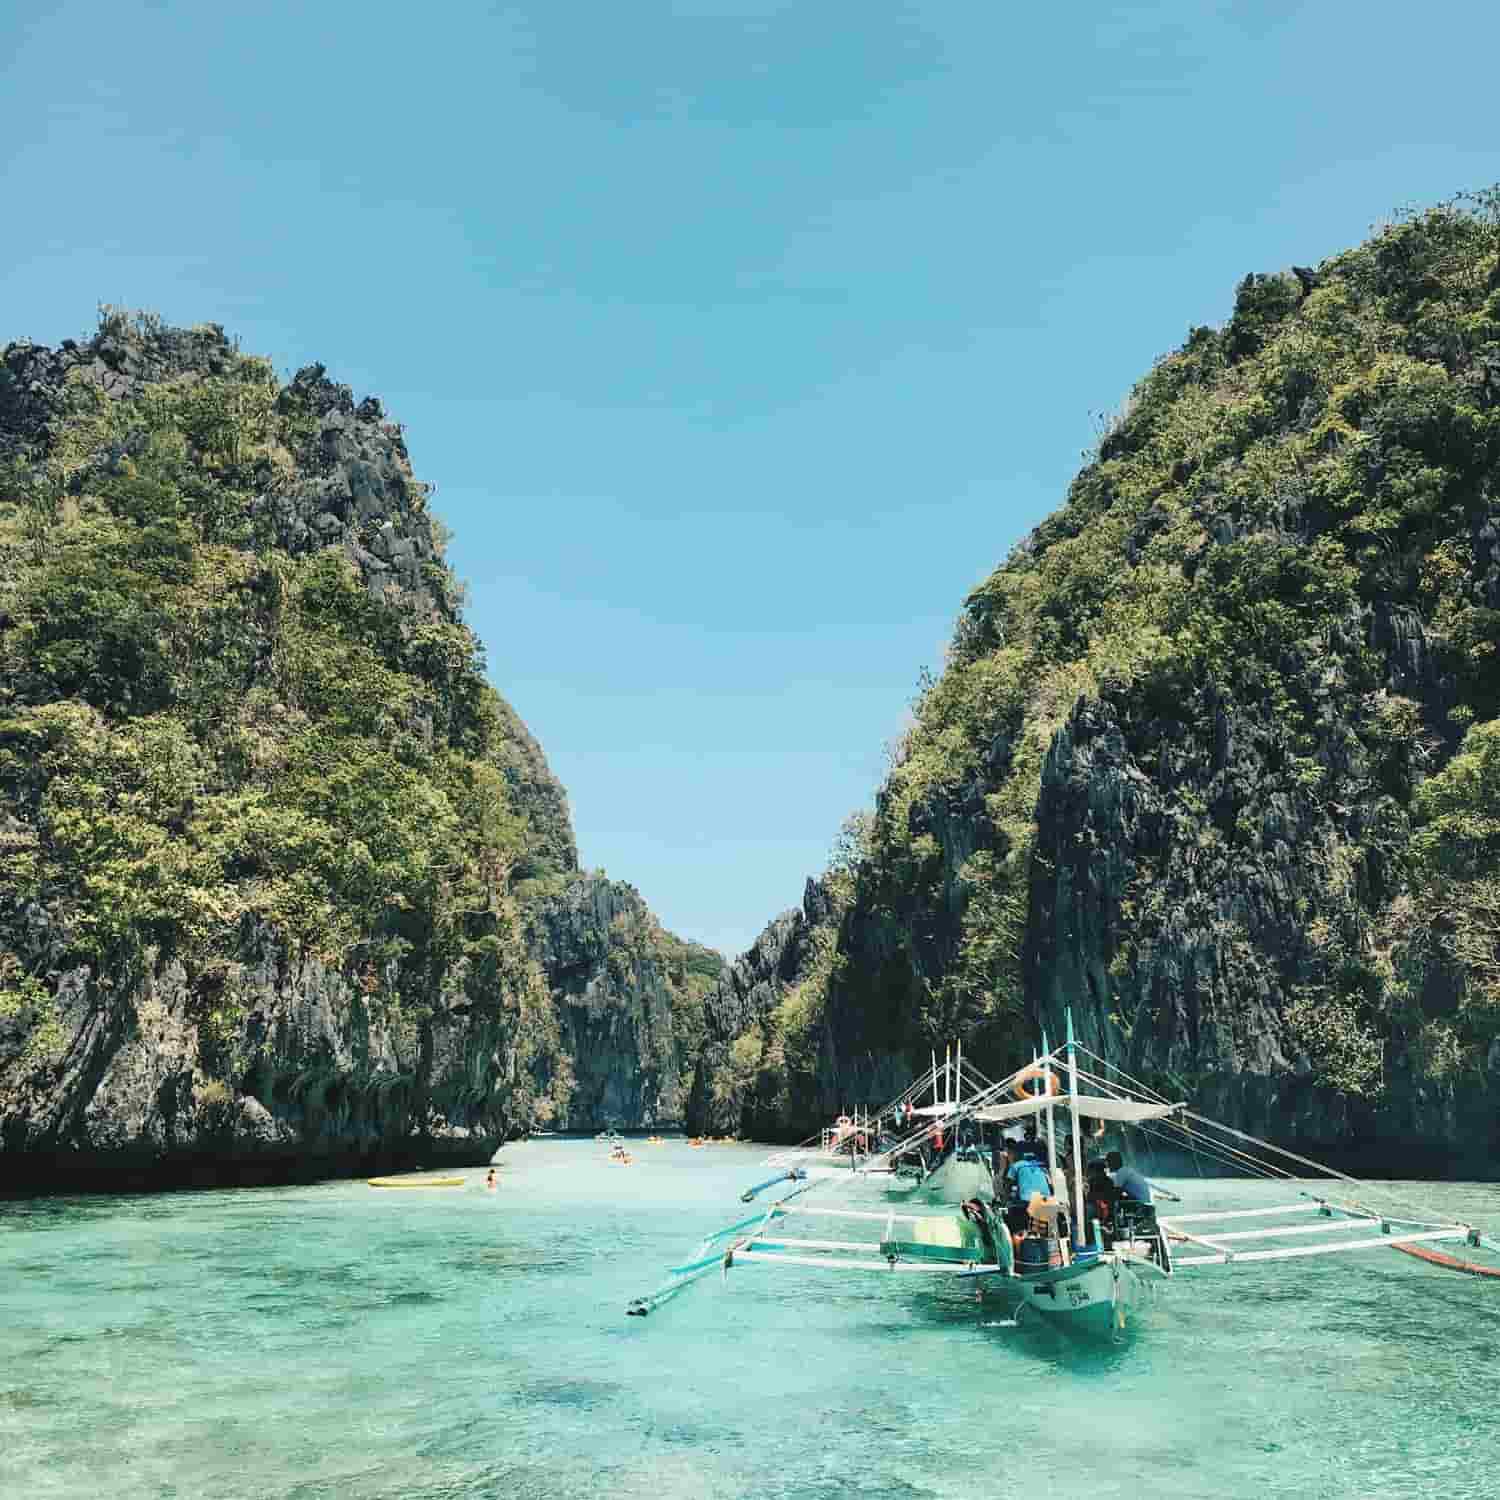 A photo of El Nido, a famous tourist spot in the Philippines